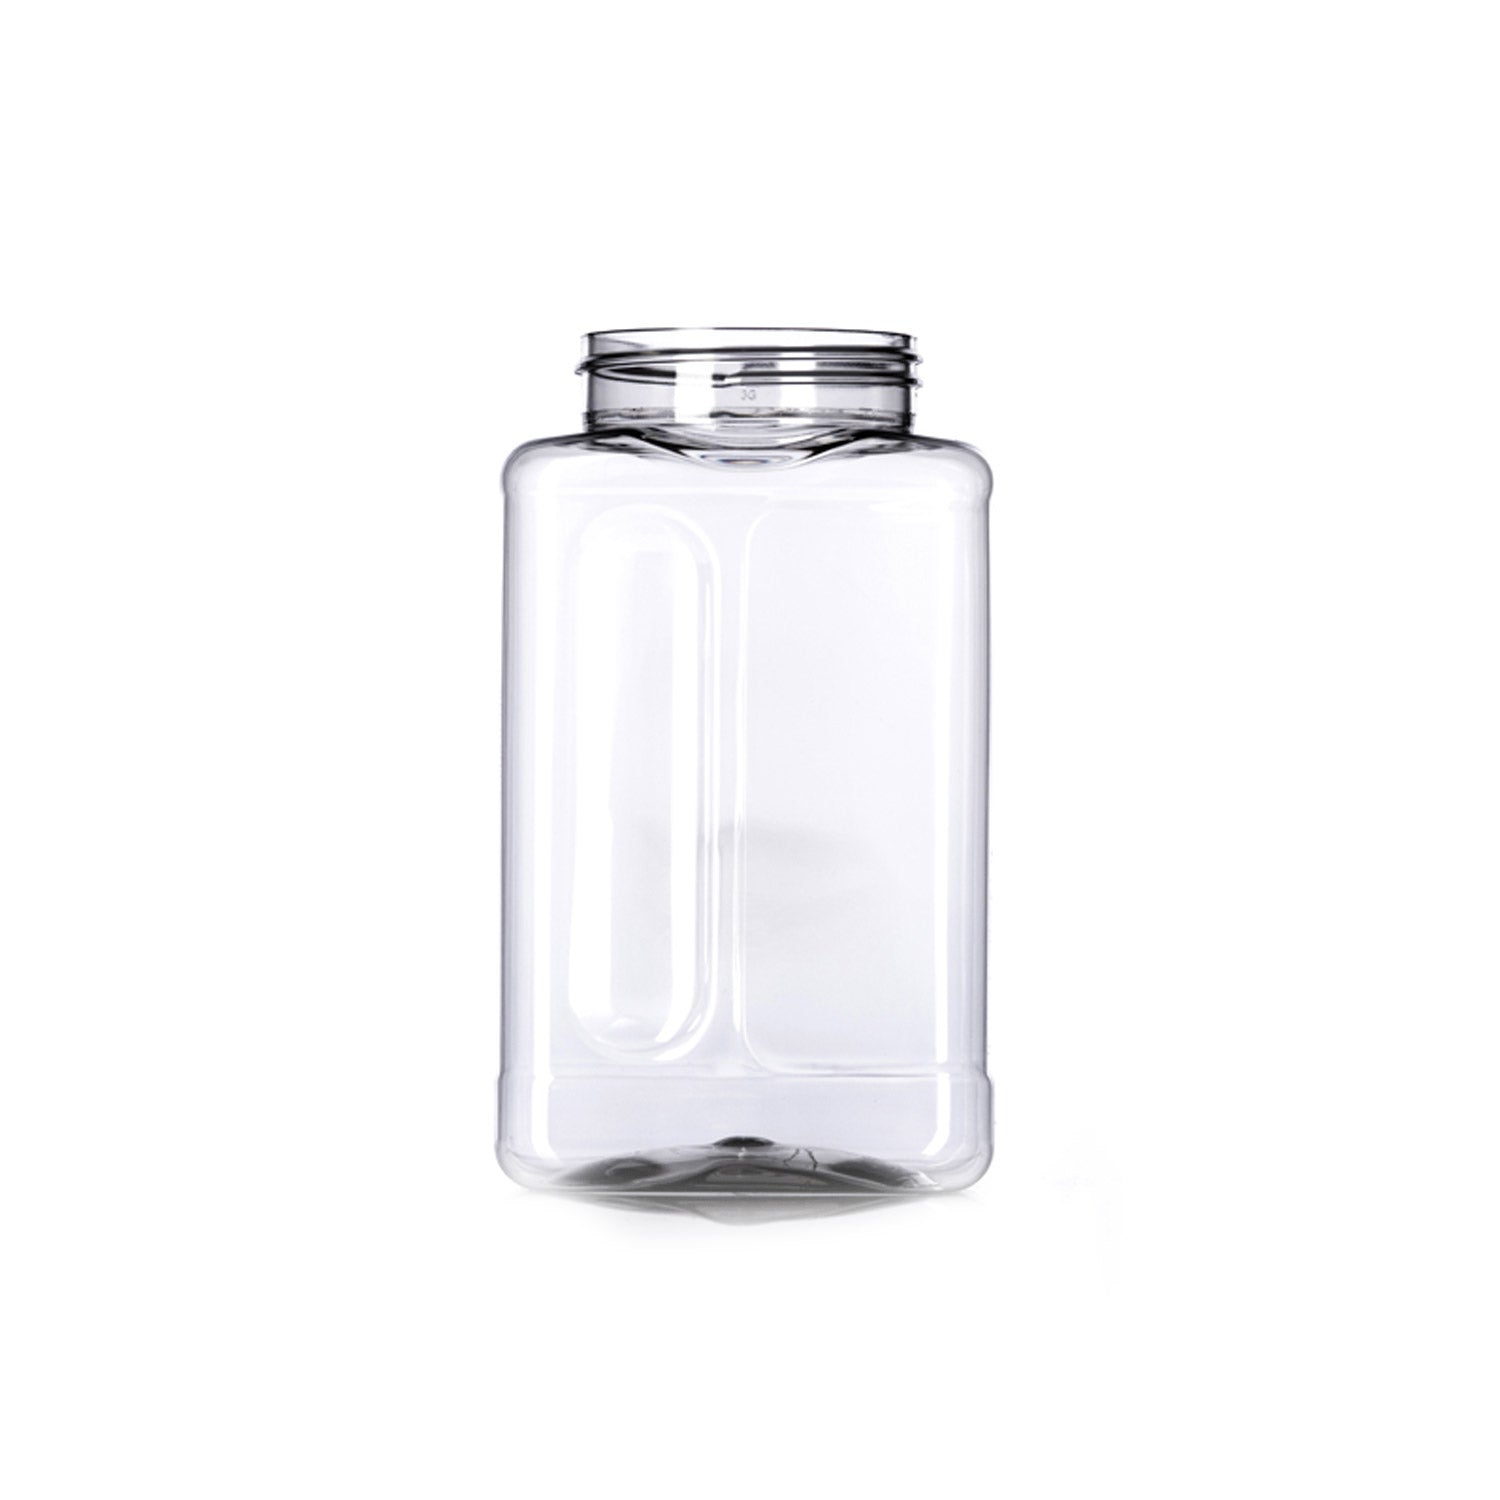 https://cdn.shopify.com/s/files/1/2823/3394/products/16oz_container.jpg?v=1521801385&width=1500